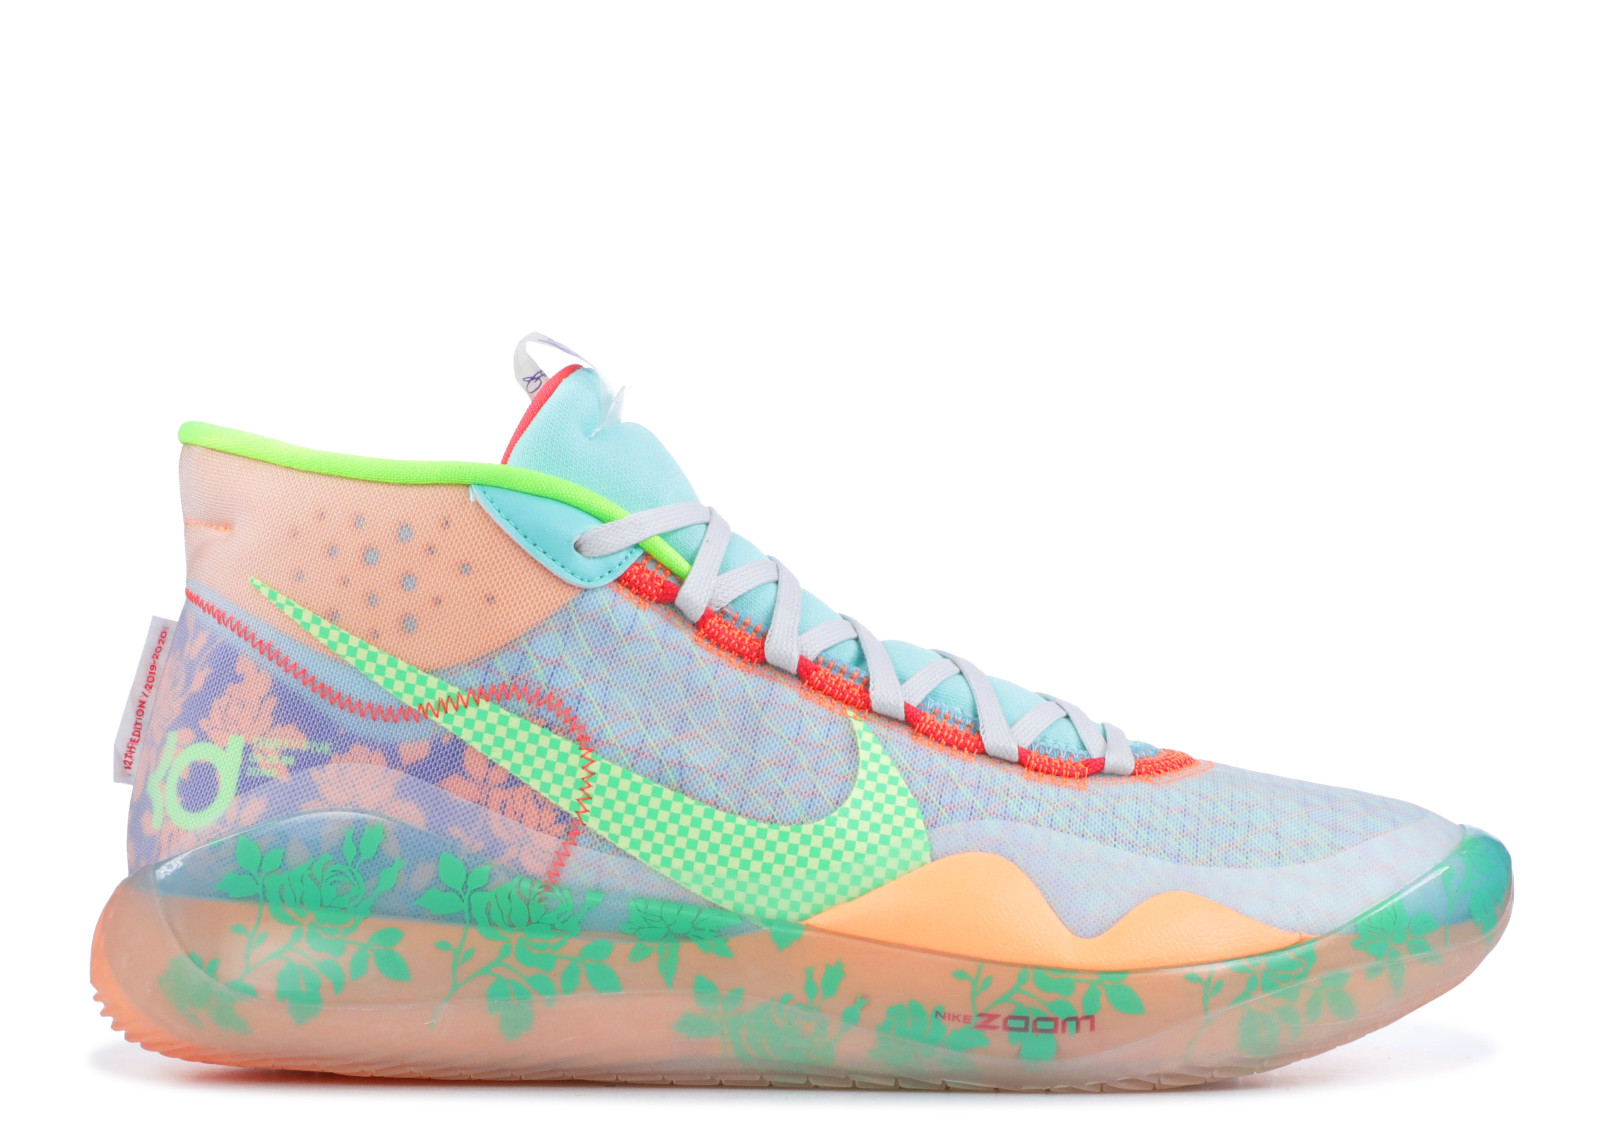 kd eybl shoes Kevin Durant shoes on sale